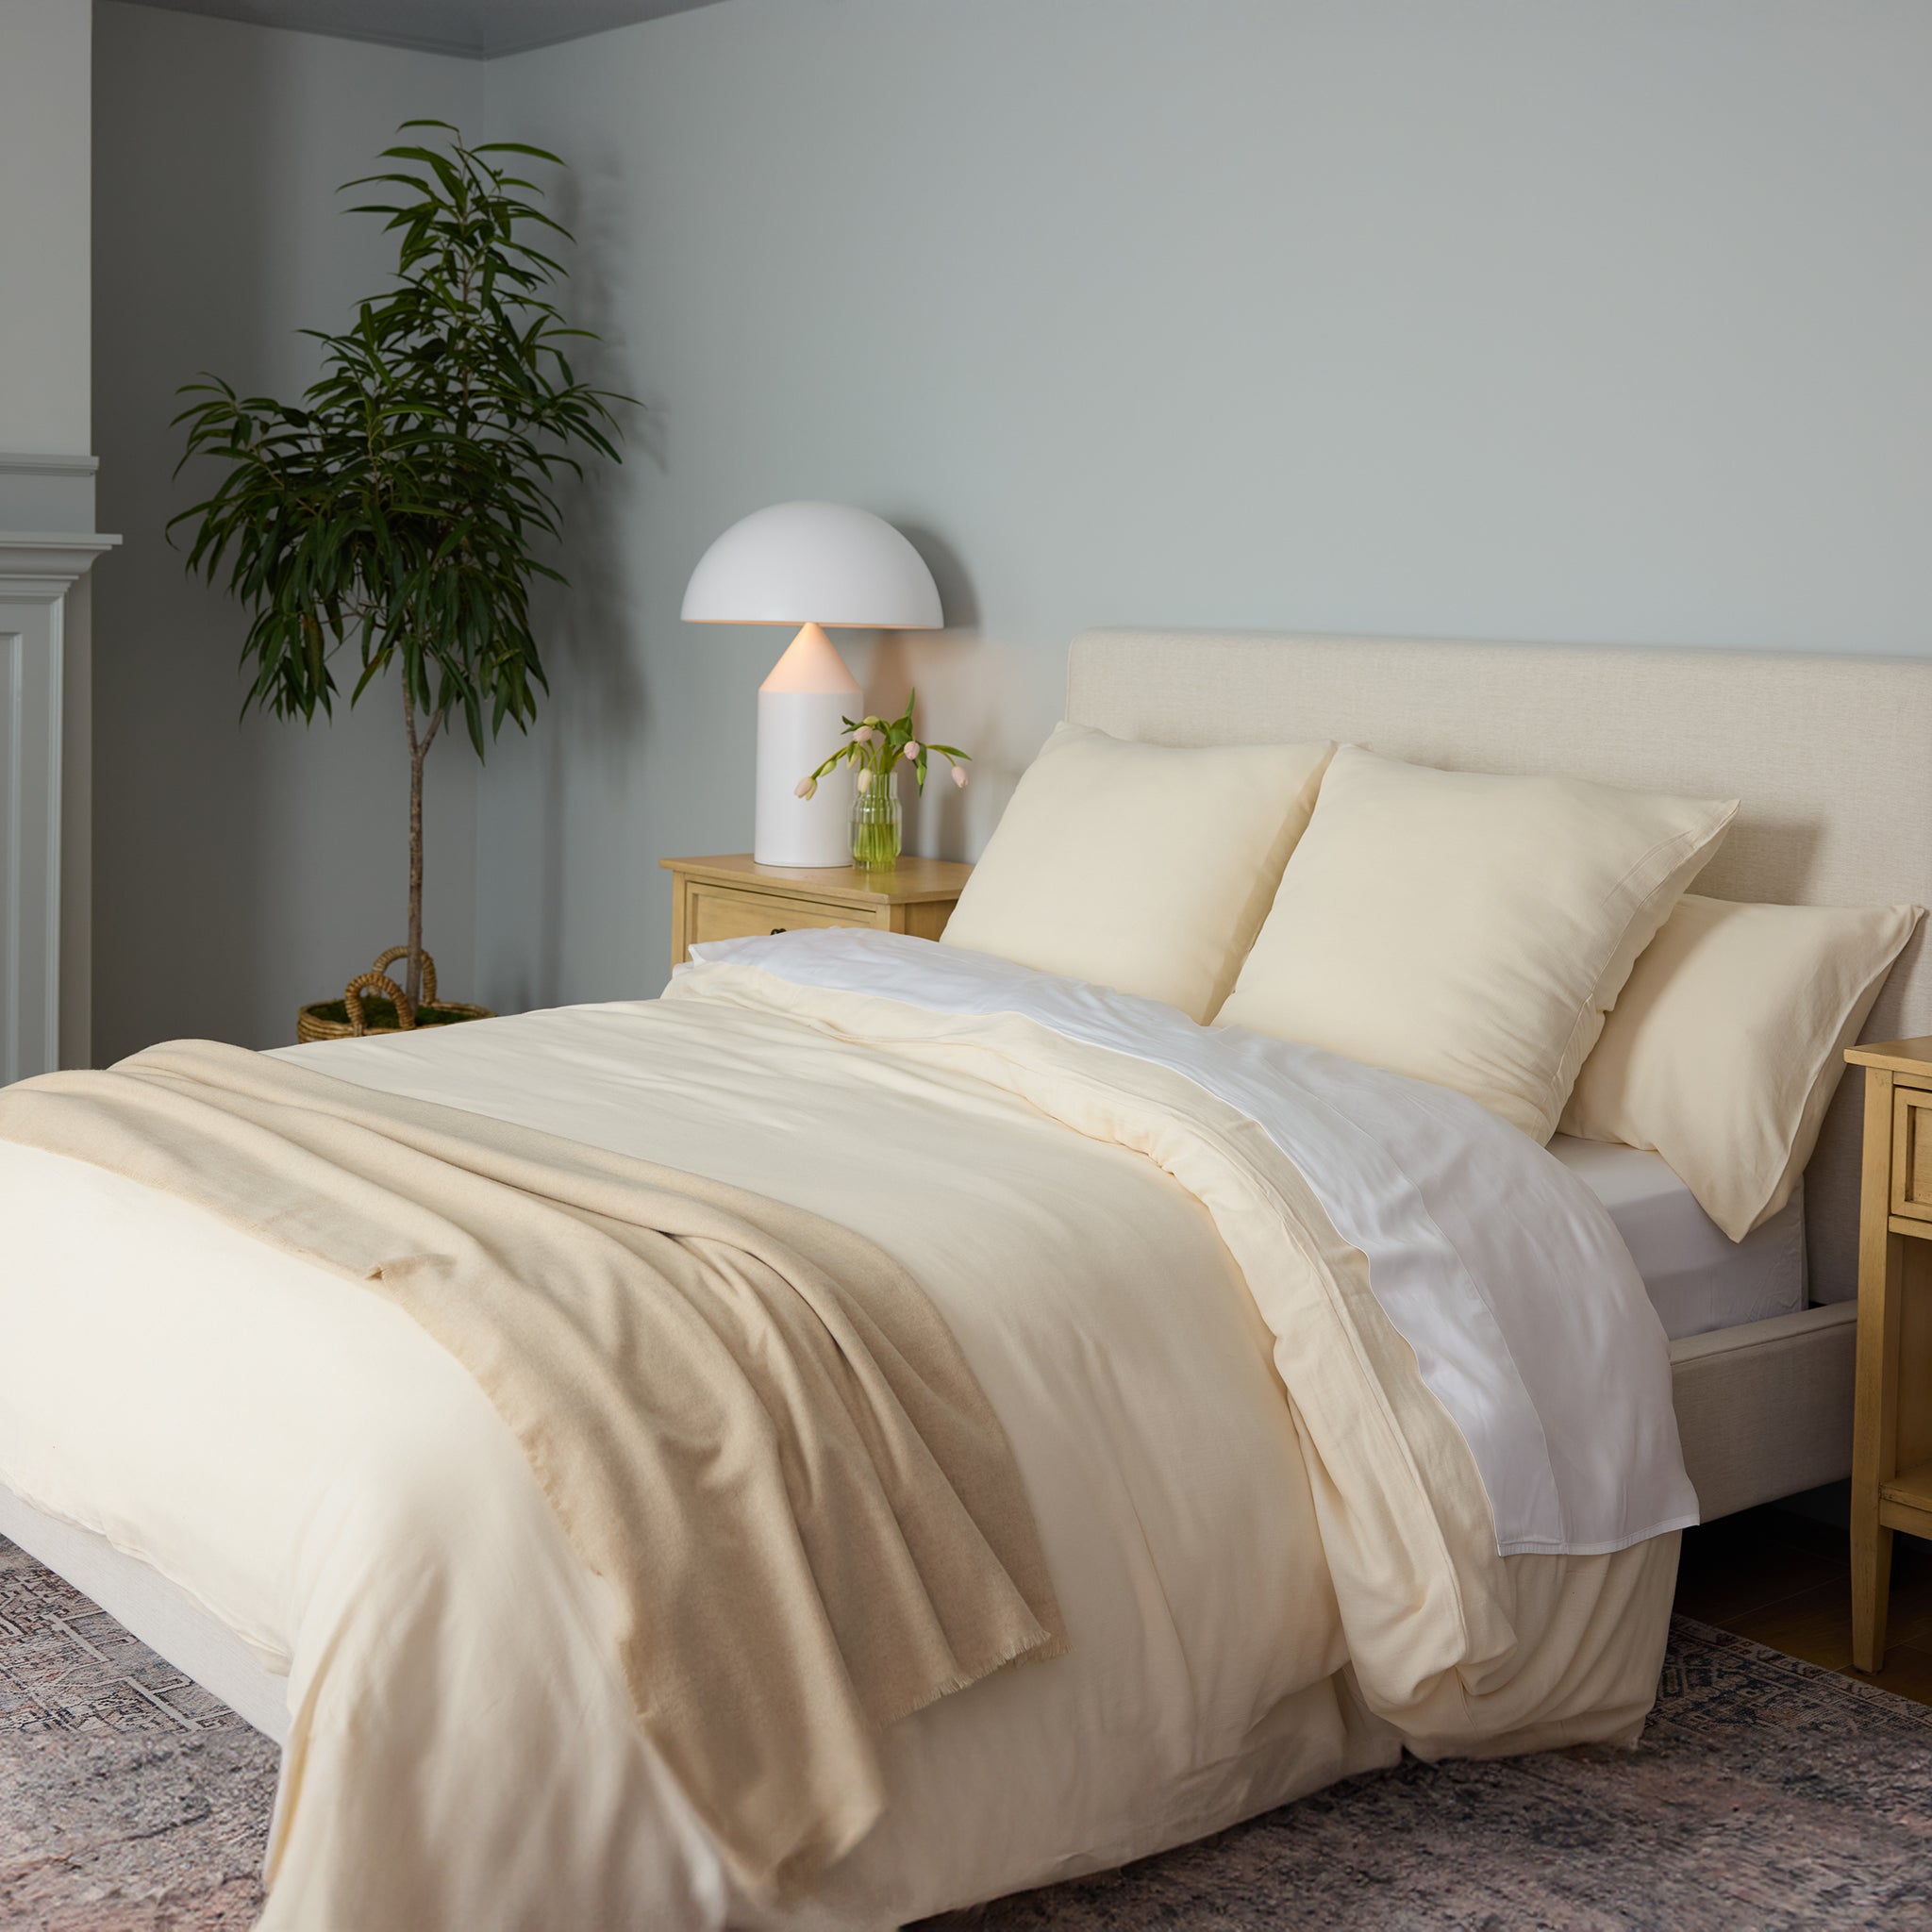 Buttermilk Aire Bamboo Duvet Cover. The Duvet Cover has been photographed while on a bed in a home bedroom.|Color:Buttermilk